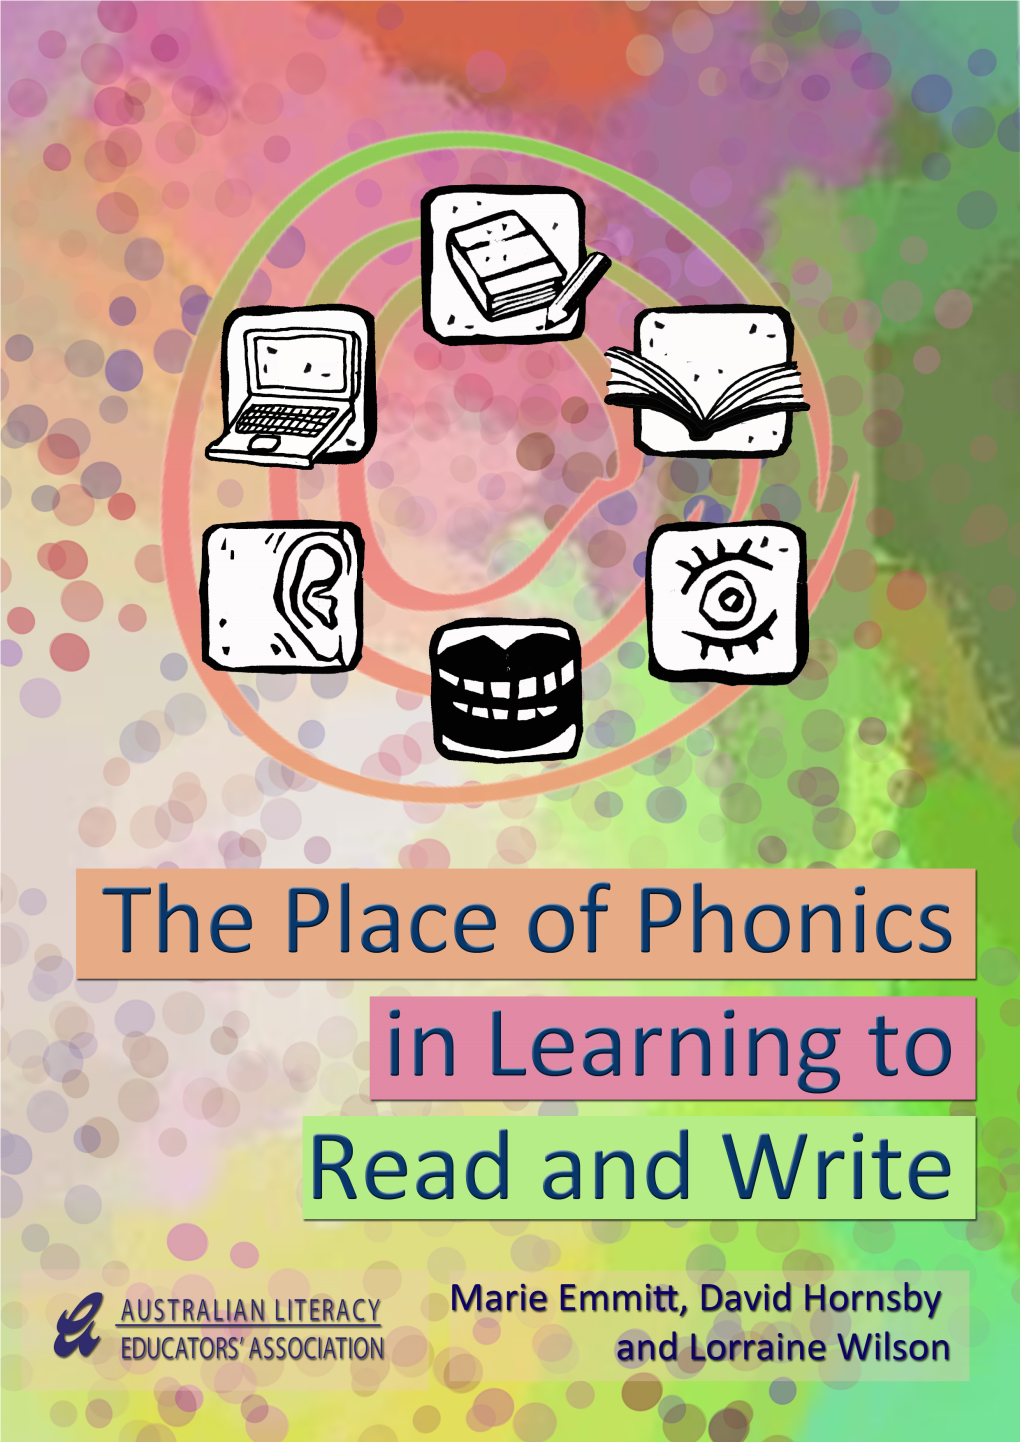 The Place of Phonics in Learning to Read and Write